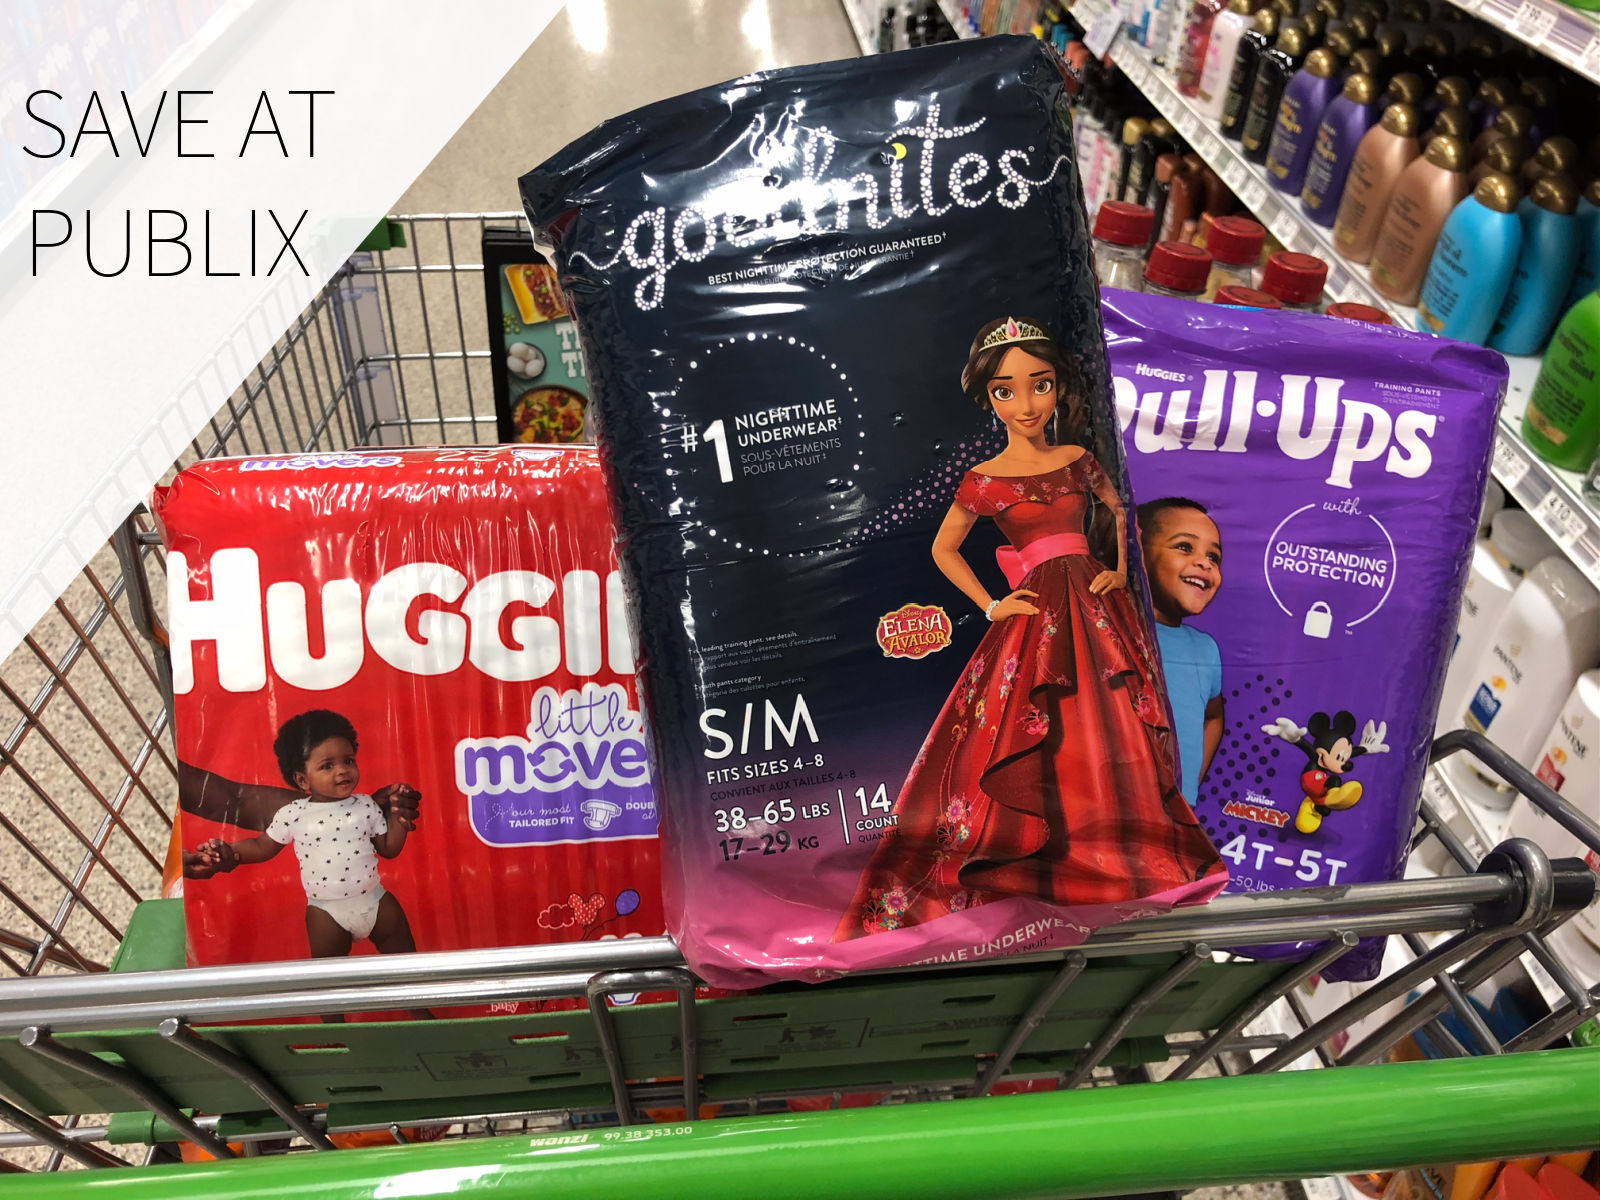 Head Into Publix For Great Deals On Huggies Diapers, Pull-Ups AND GoodNites! on I Heart Publix 2